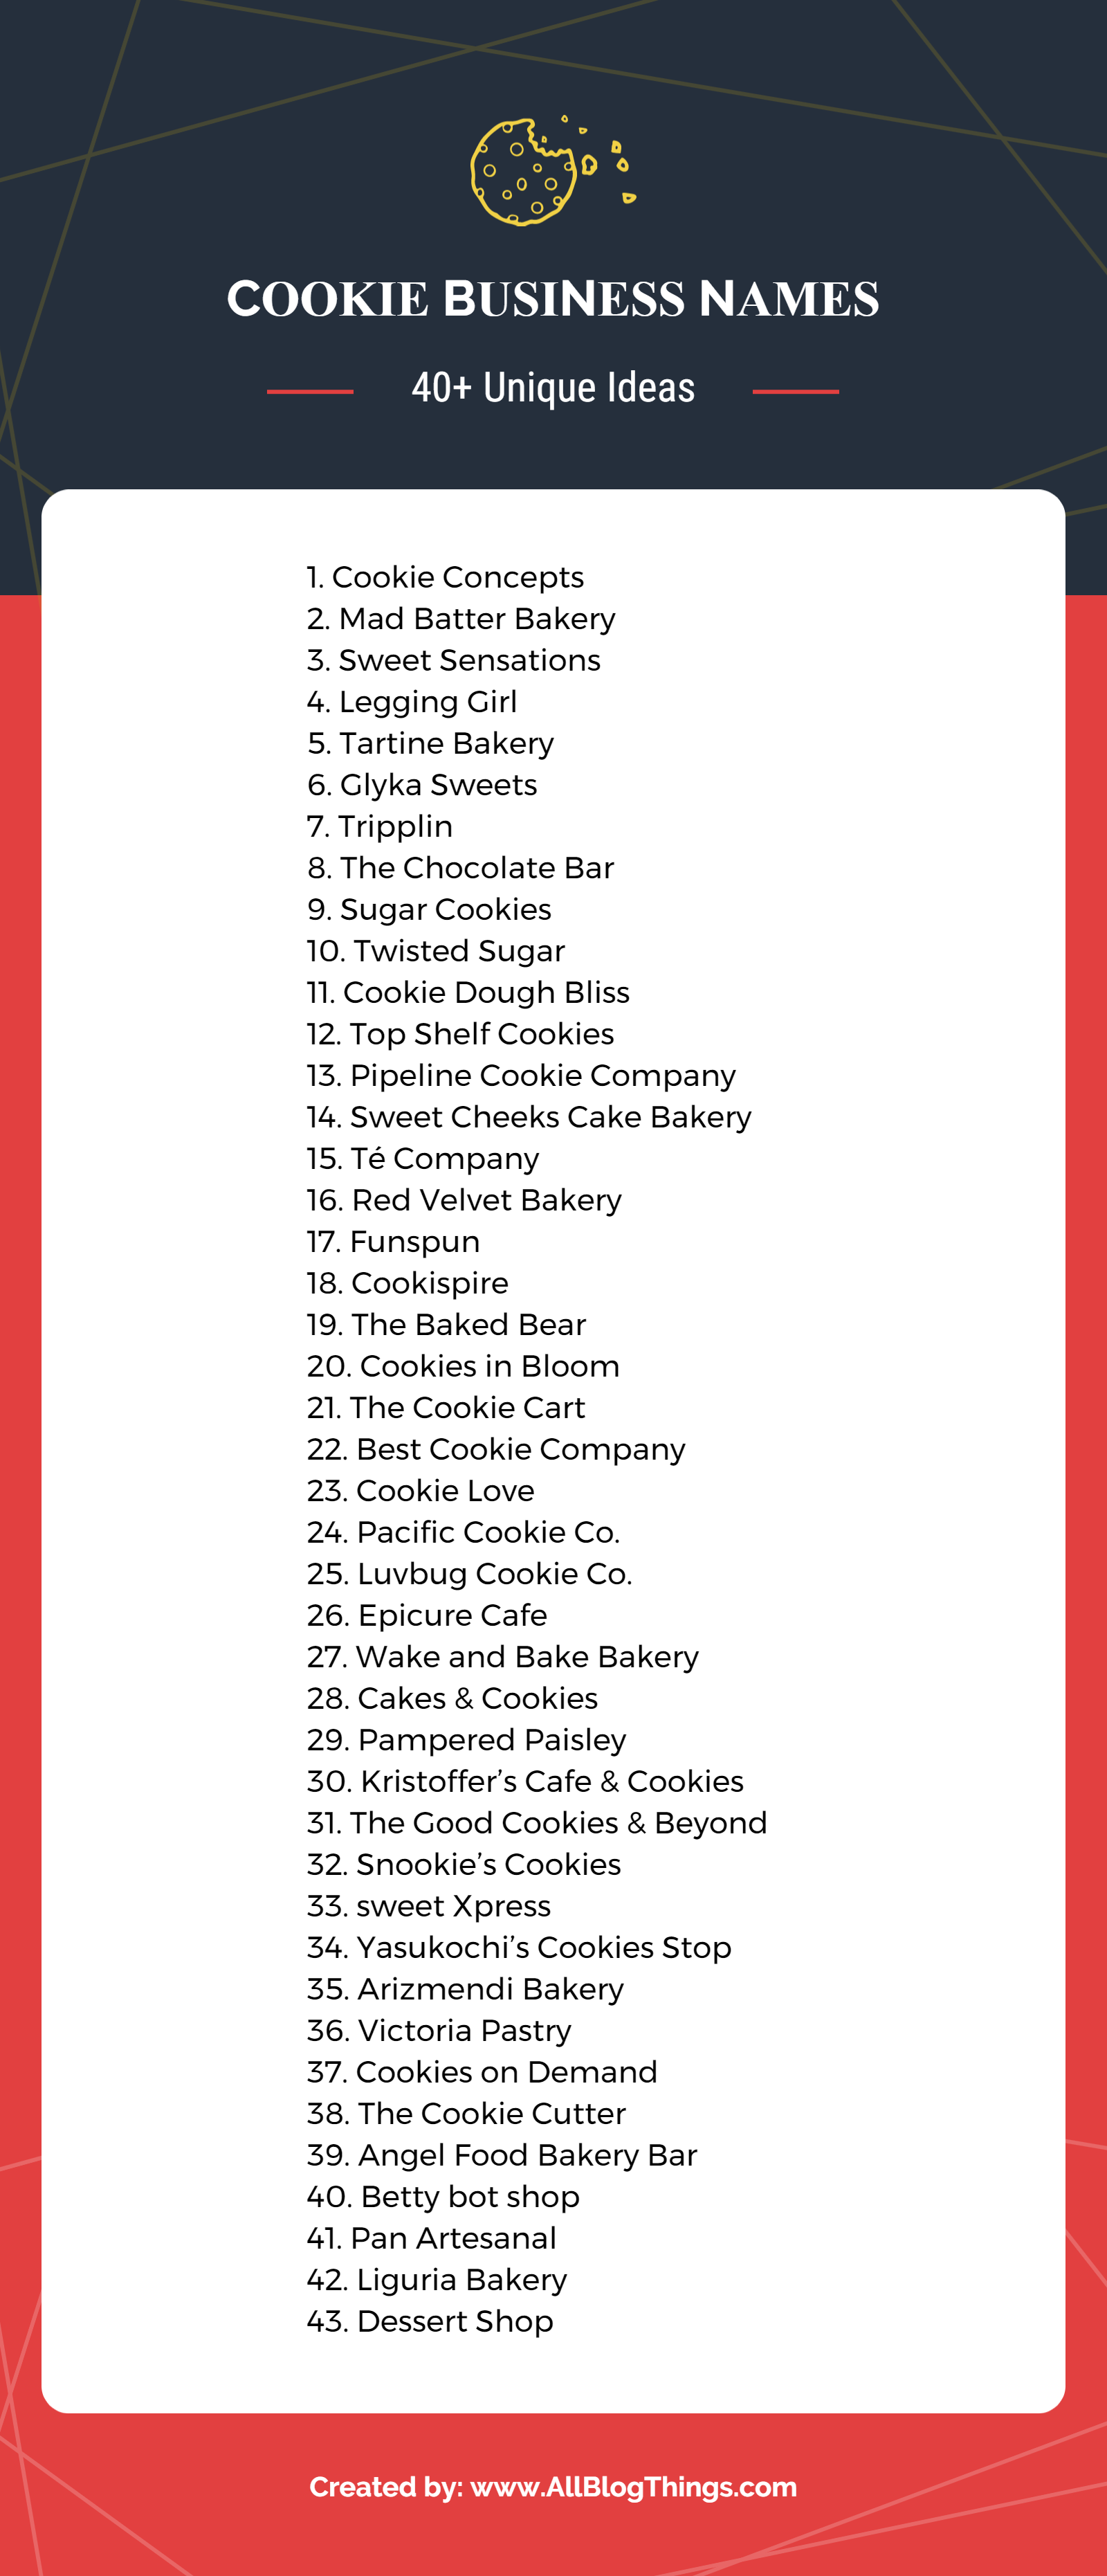 40+ Unique Cookie Company Names Infographic by AllBlogThings.com